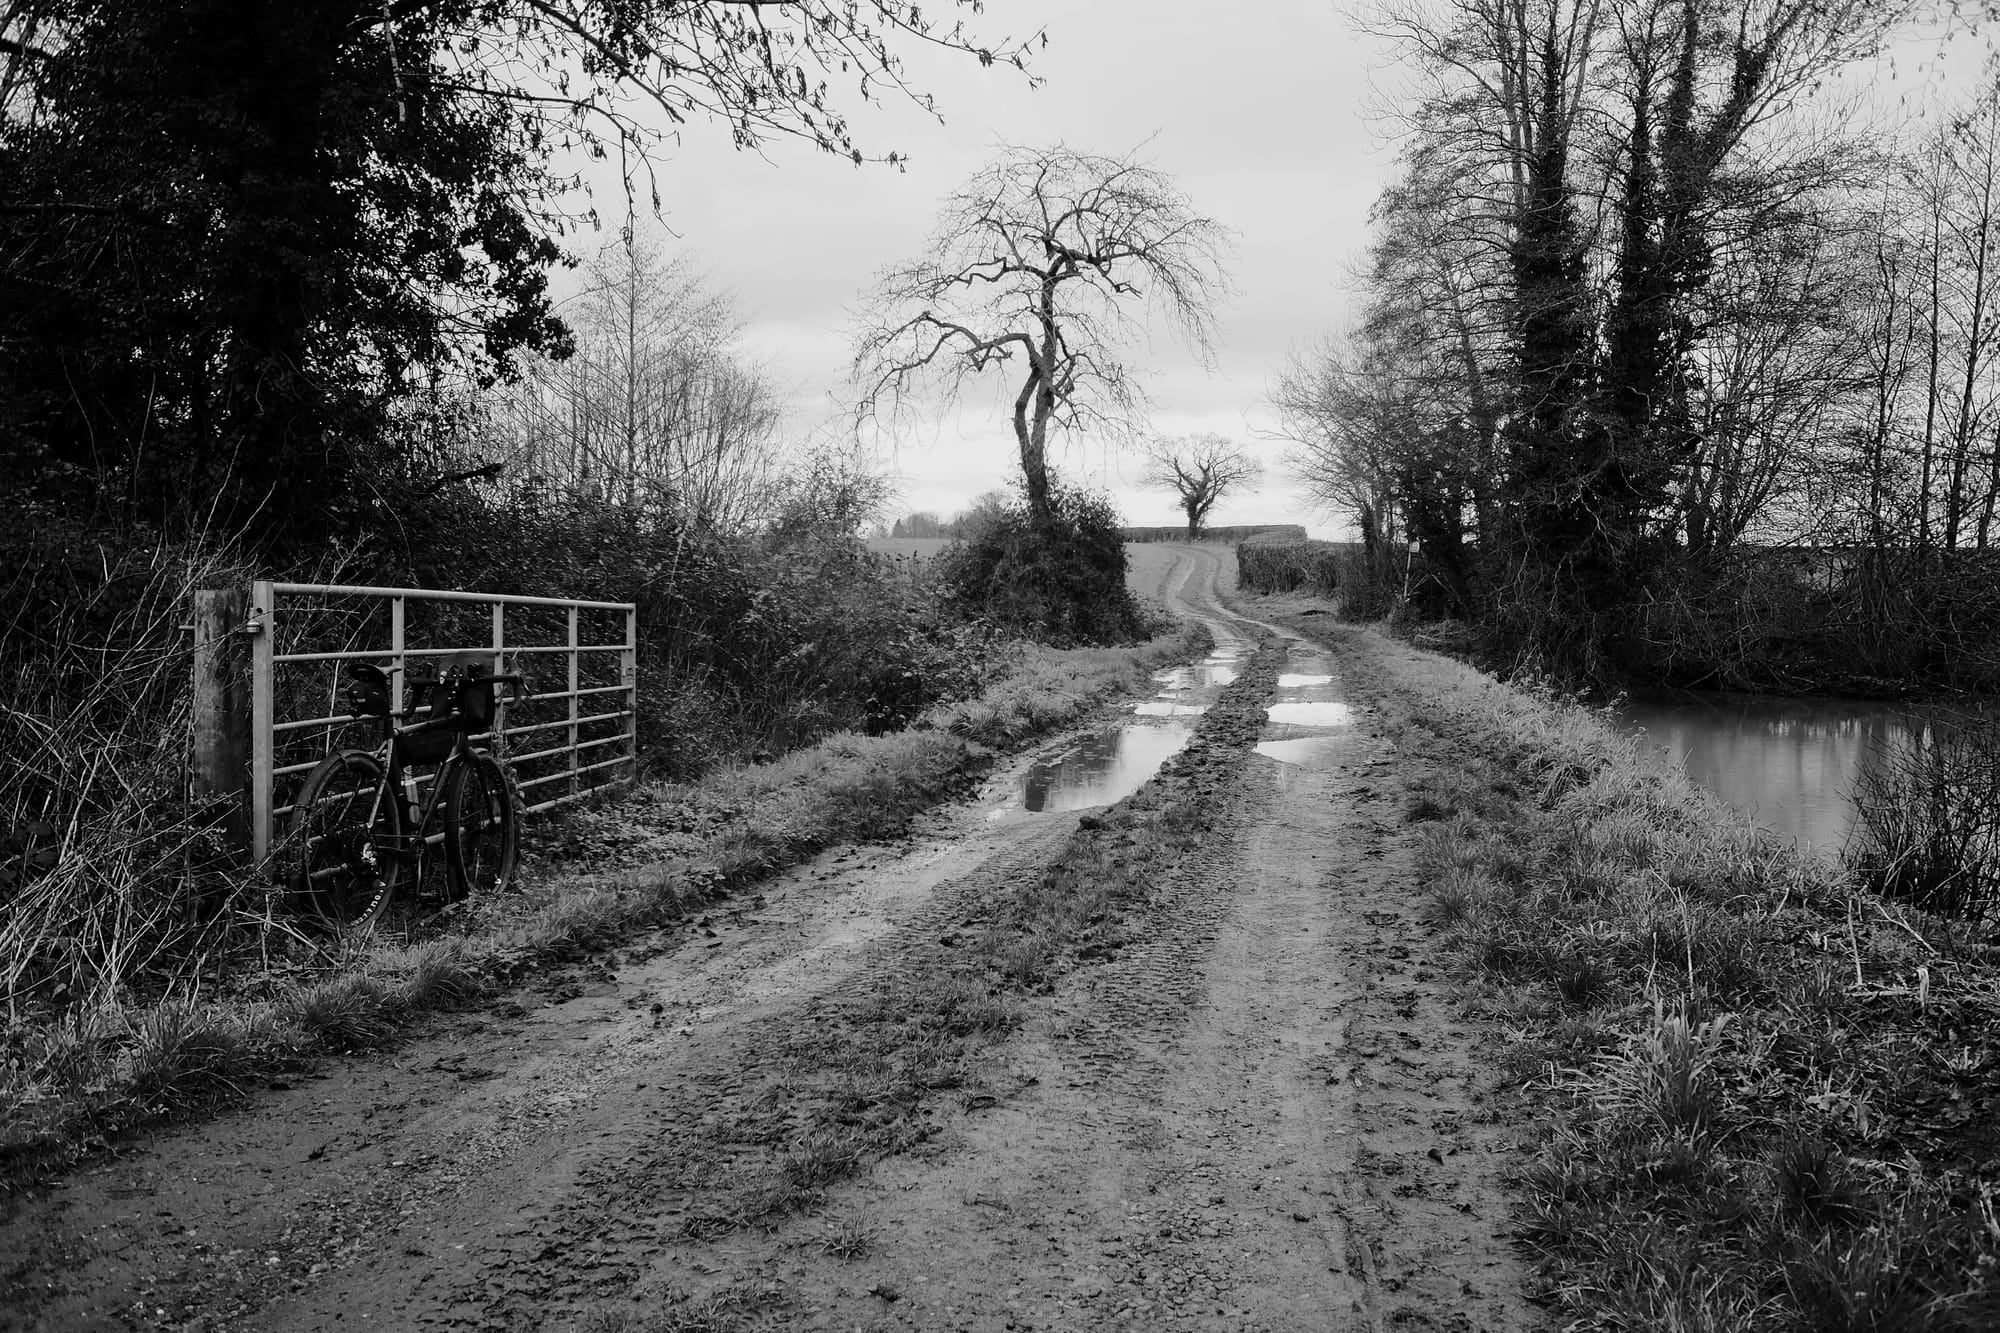 A black and white image of a bike leaning on a farm gate, a muddy track stretching into the distance between trees.